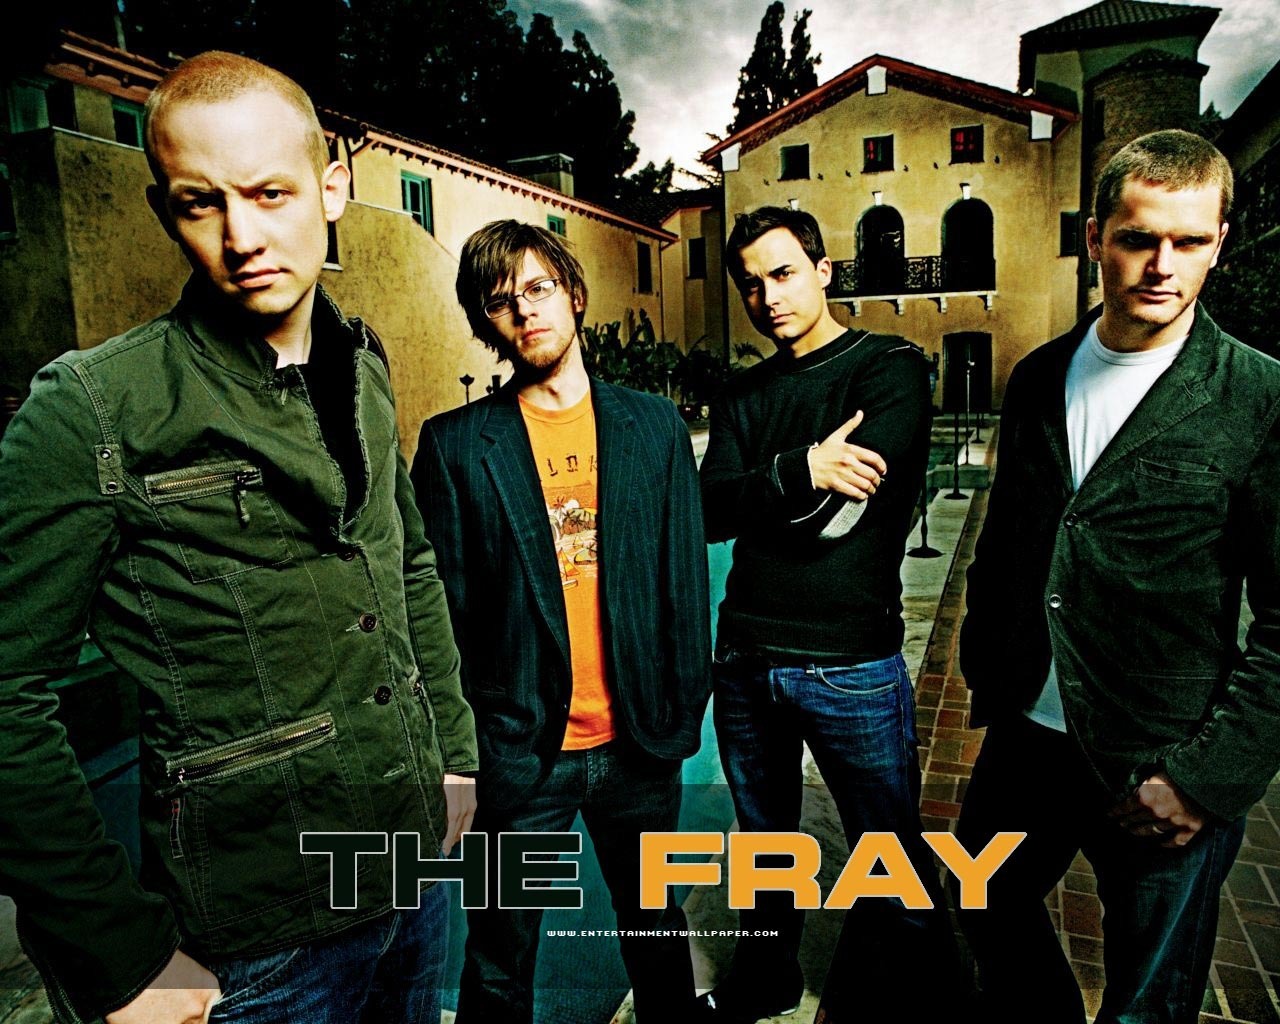 THE FRAY - THE FRAY Wallpaper (2116421) - Fanpop